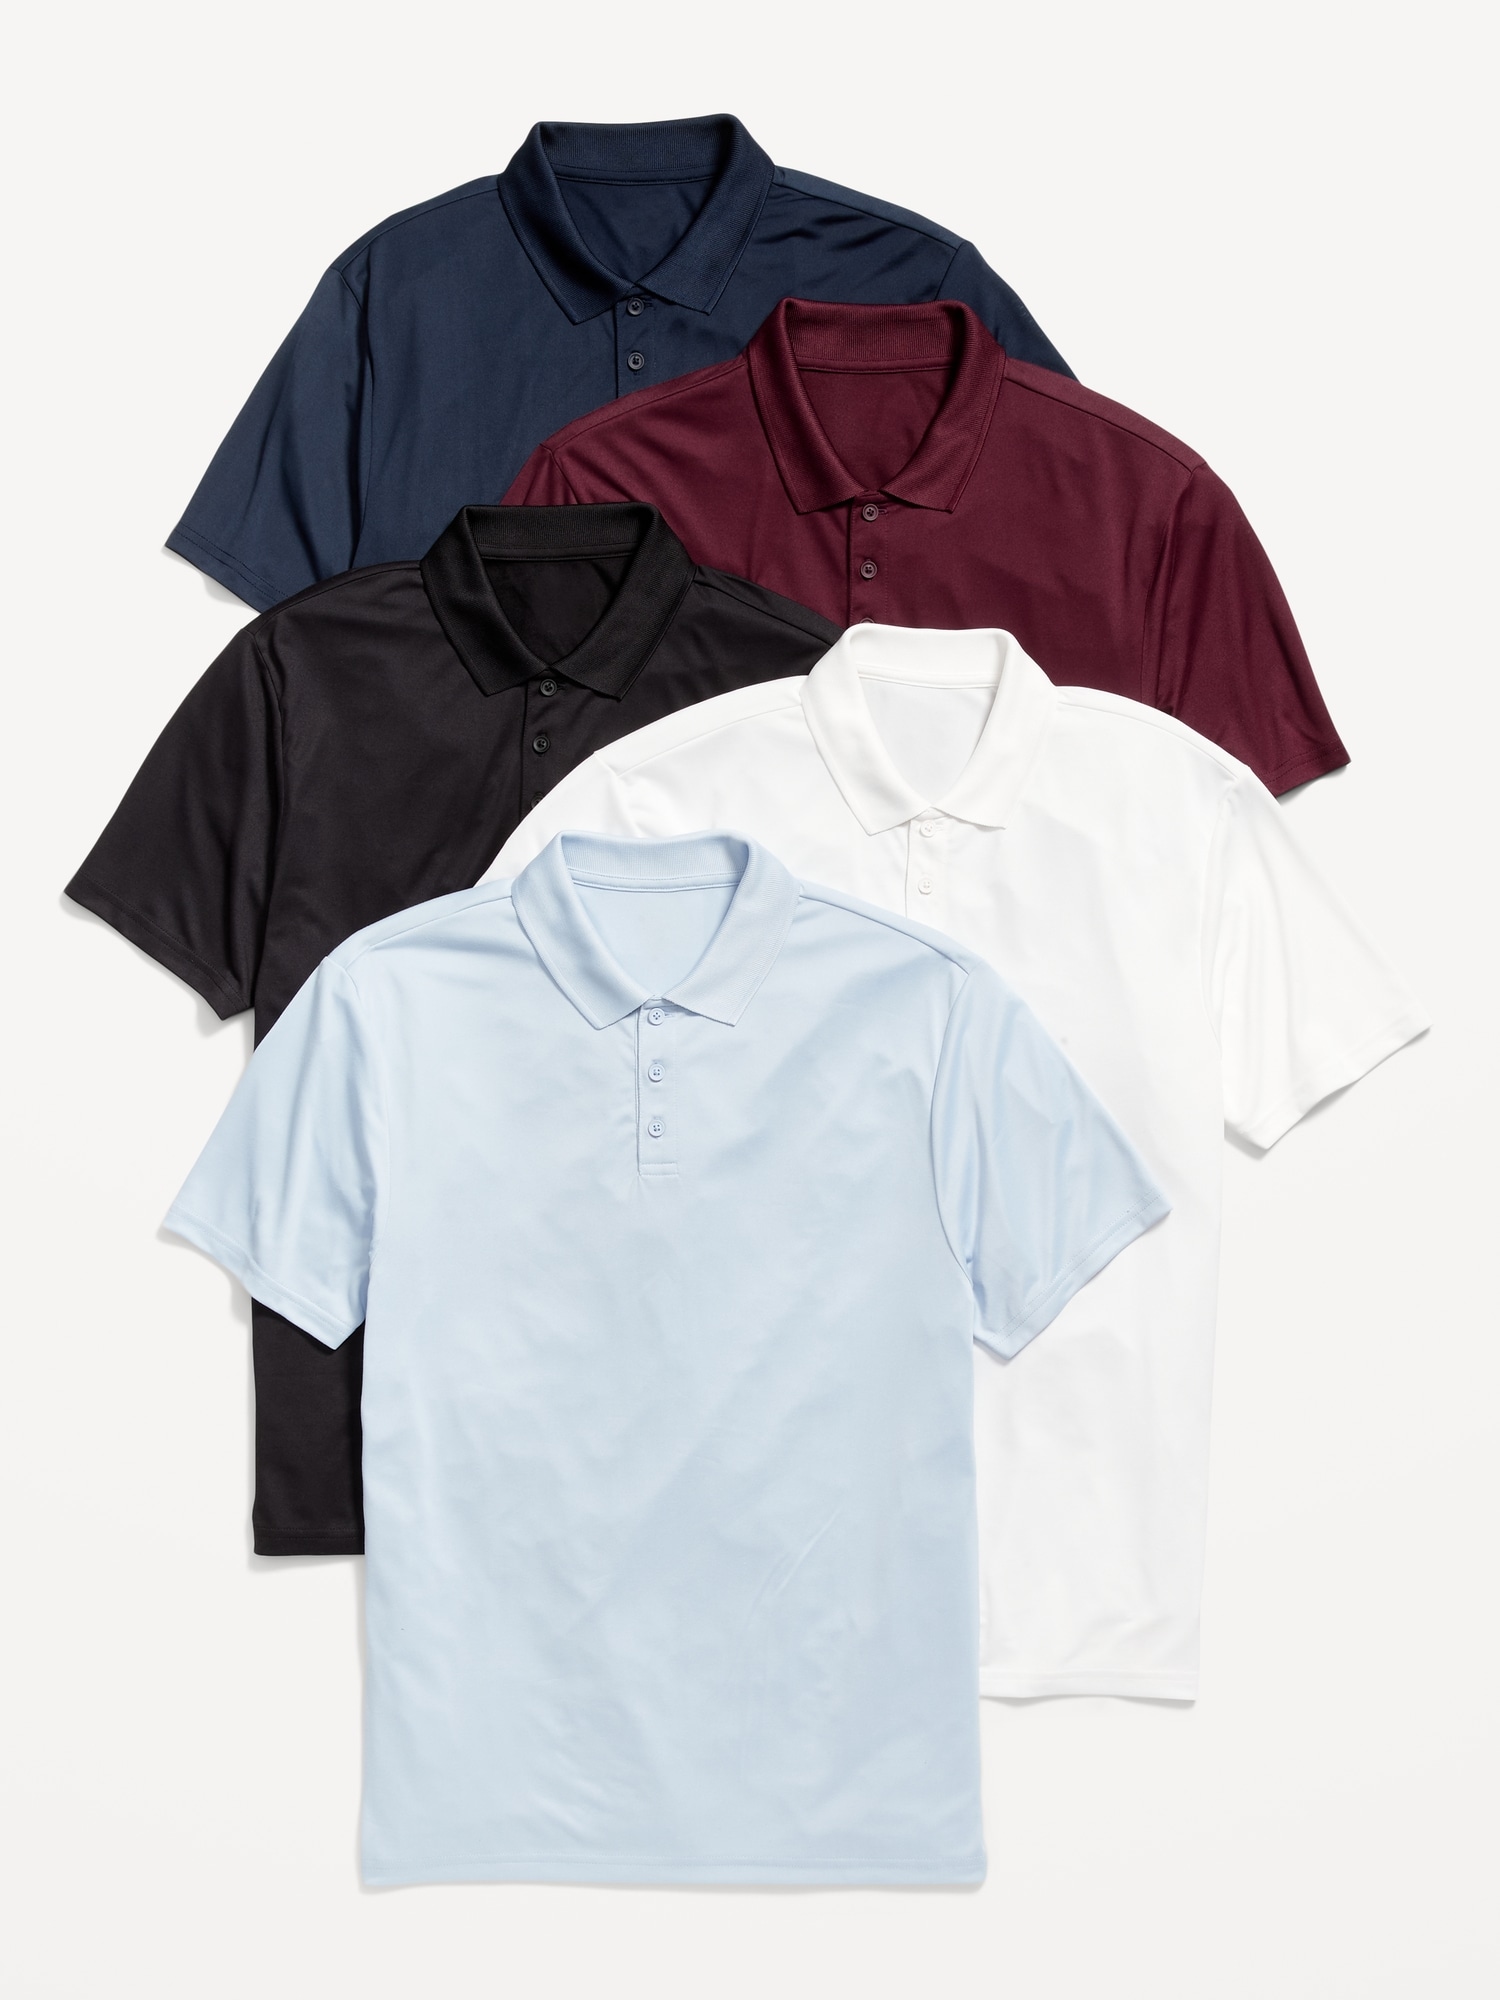 Old Navy Men's Tech Core Polo 5-Pack - Multi - Size S